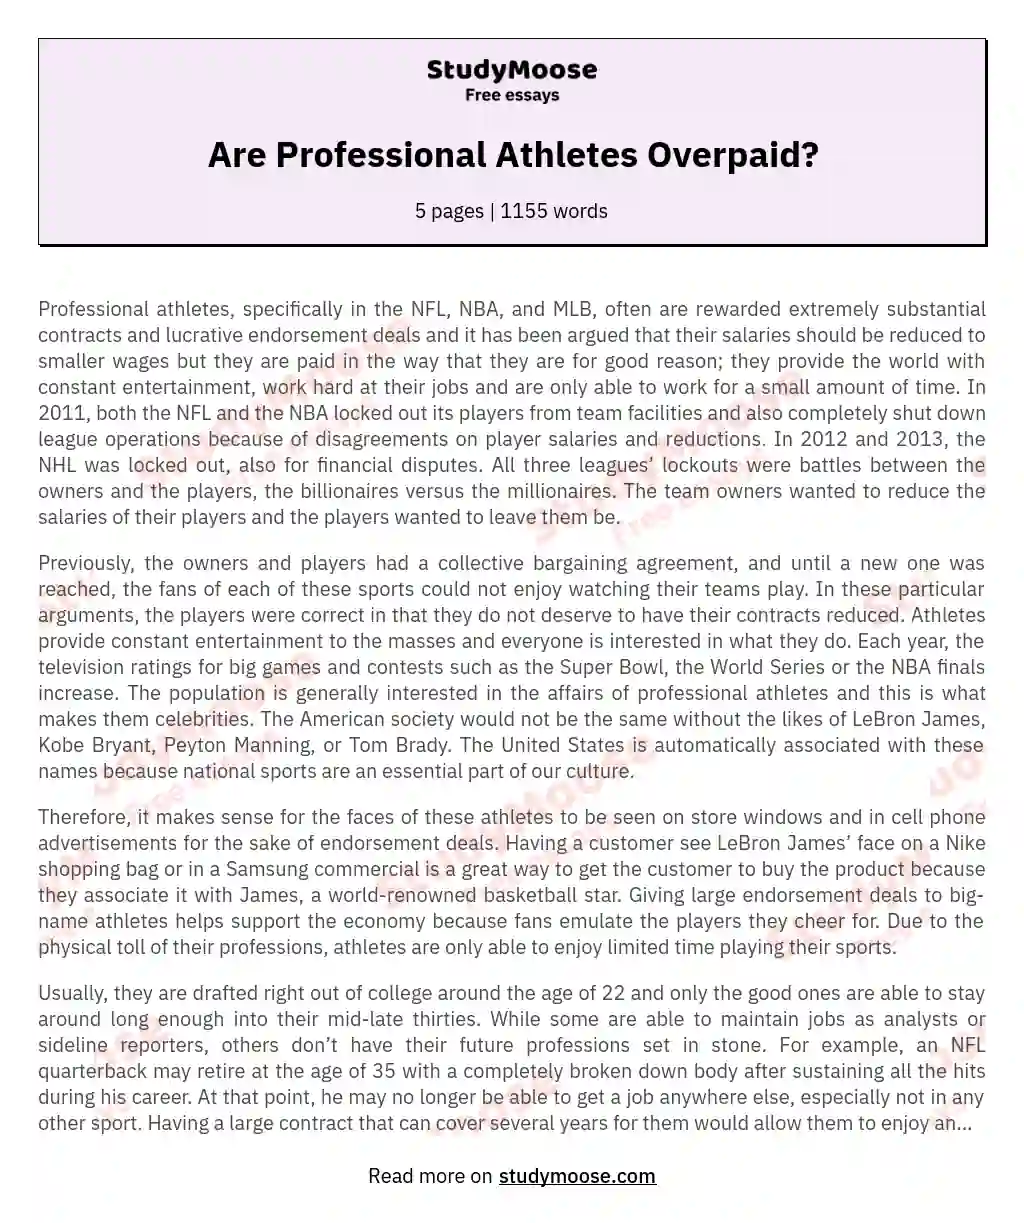 Are Professional Athletes Overpaid? essay